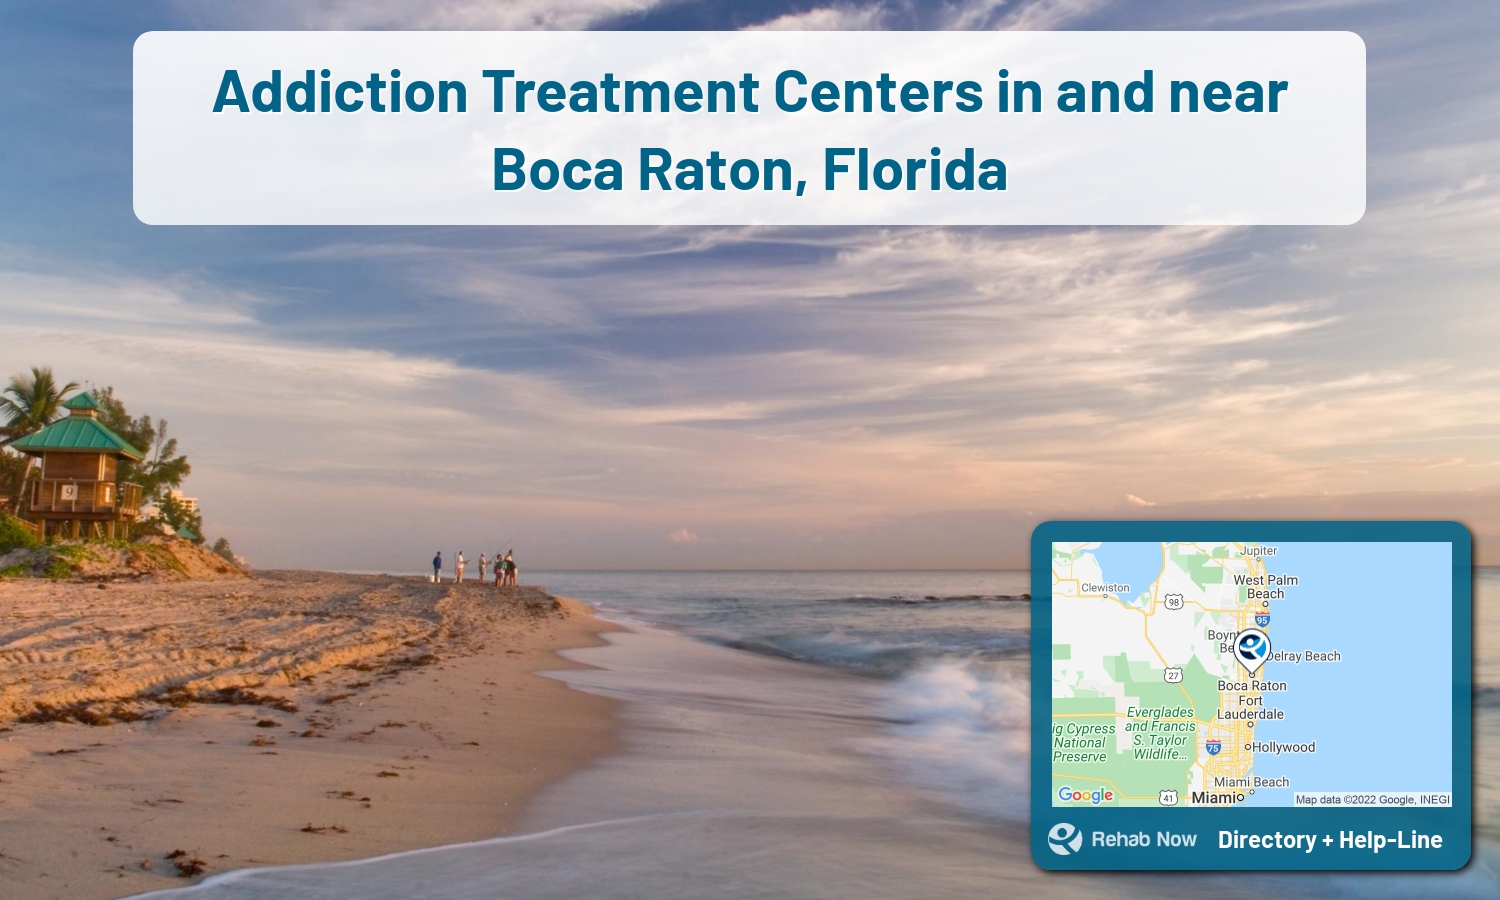 Our experts can help you find treatment now in Boca Raton, Florida. We list drug rehab and alcohol centers in Florida.